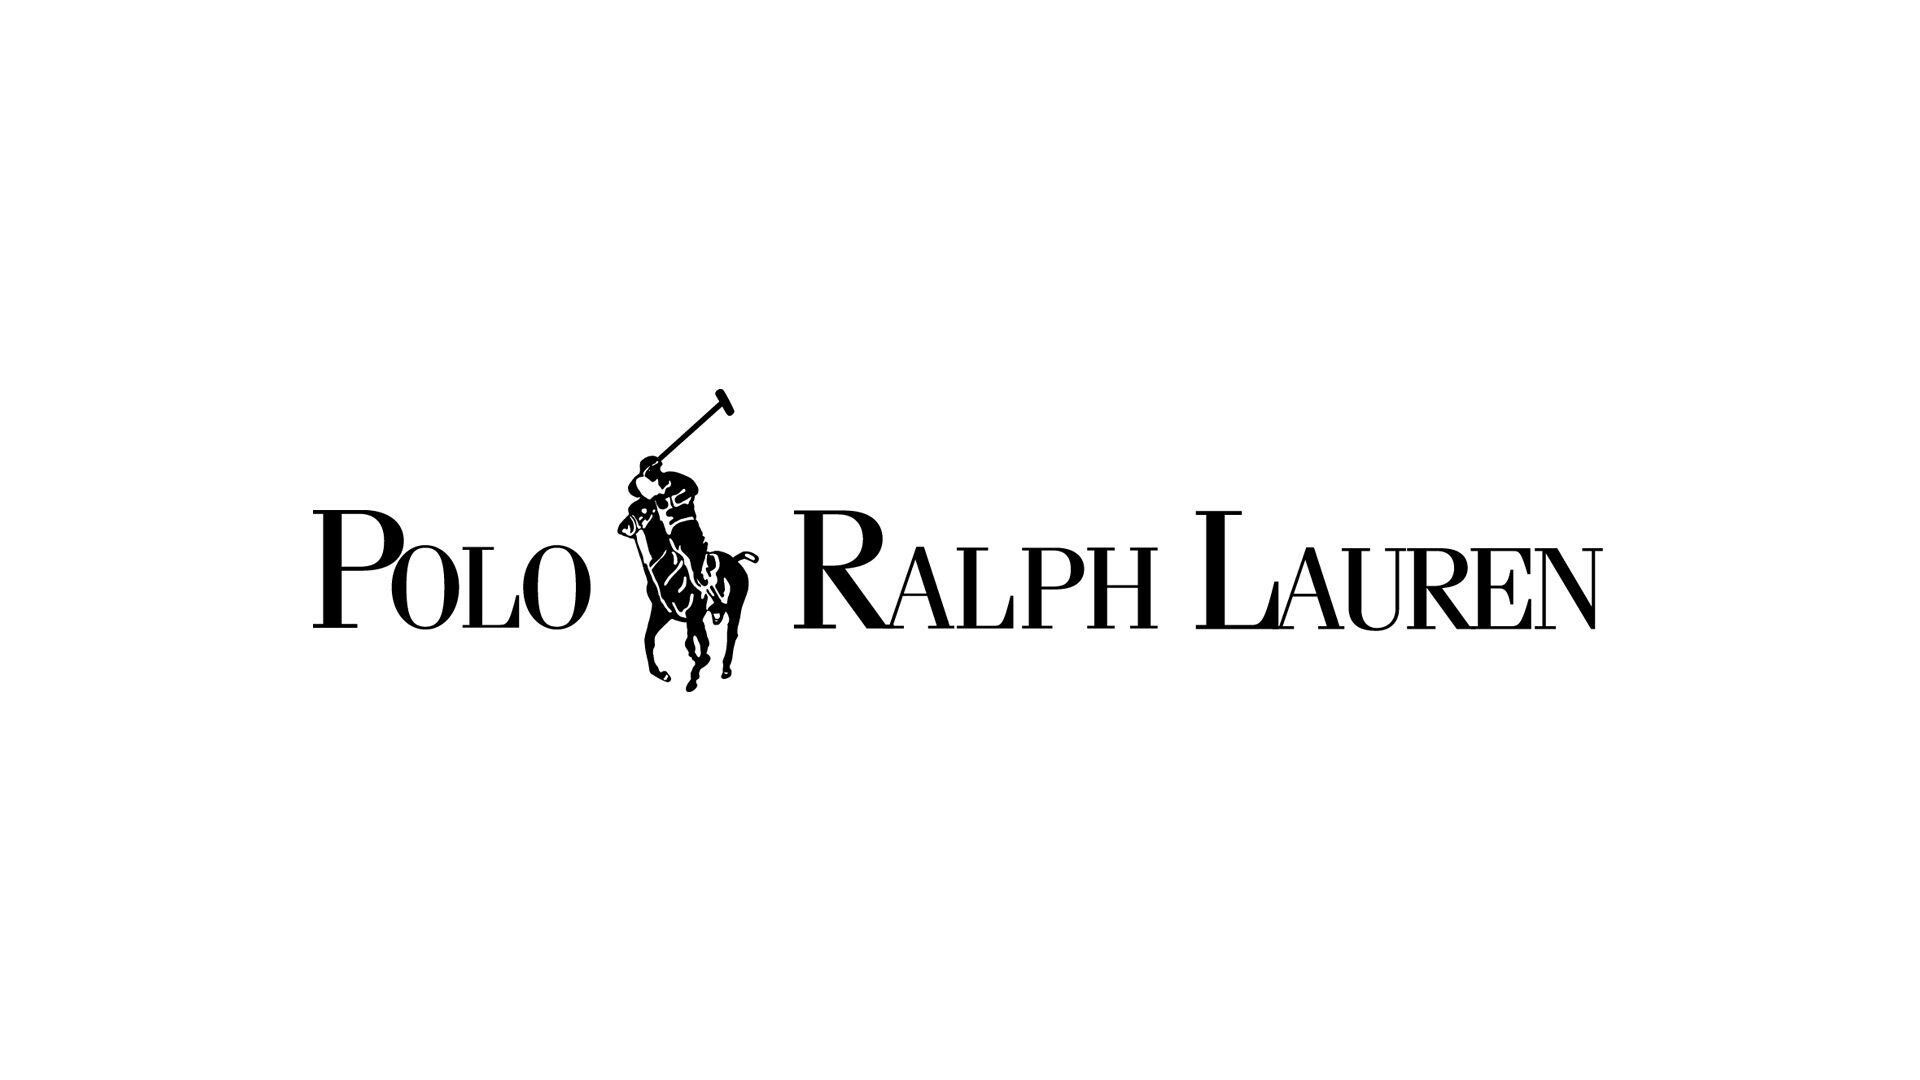 Ralph Lauren: The American icon, designing clothes since 1967, Monochrome. 1920x1080 Full HD Wallpaper.